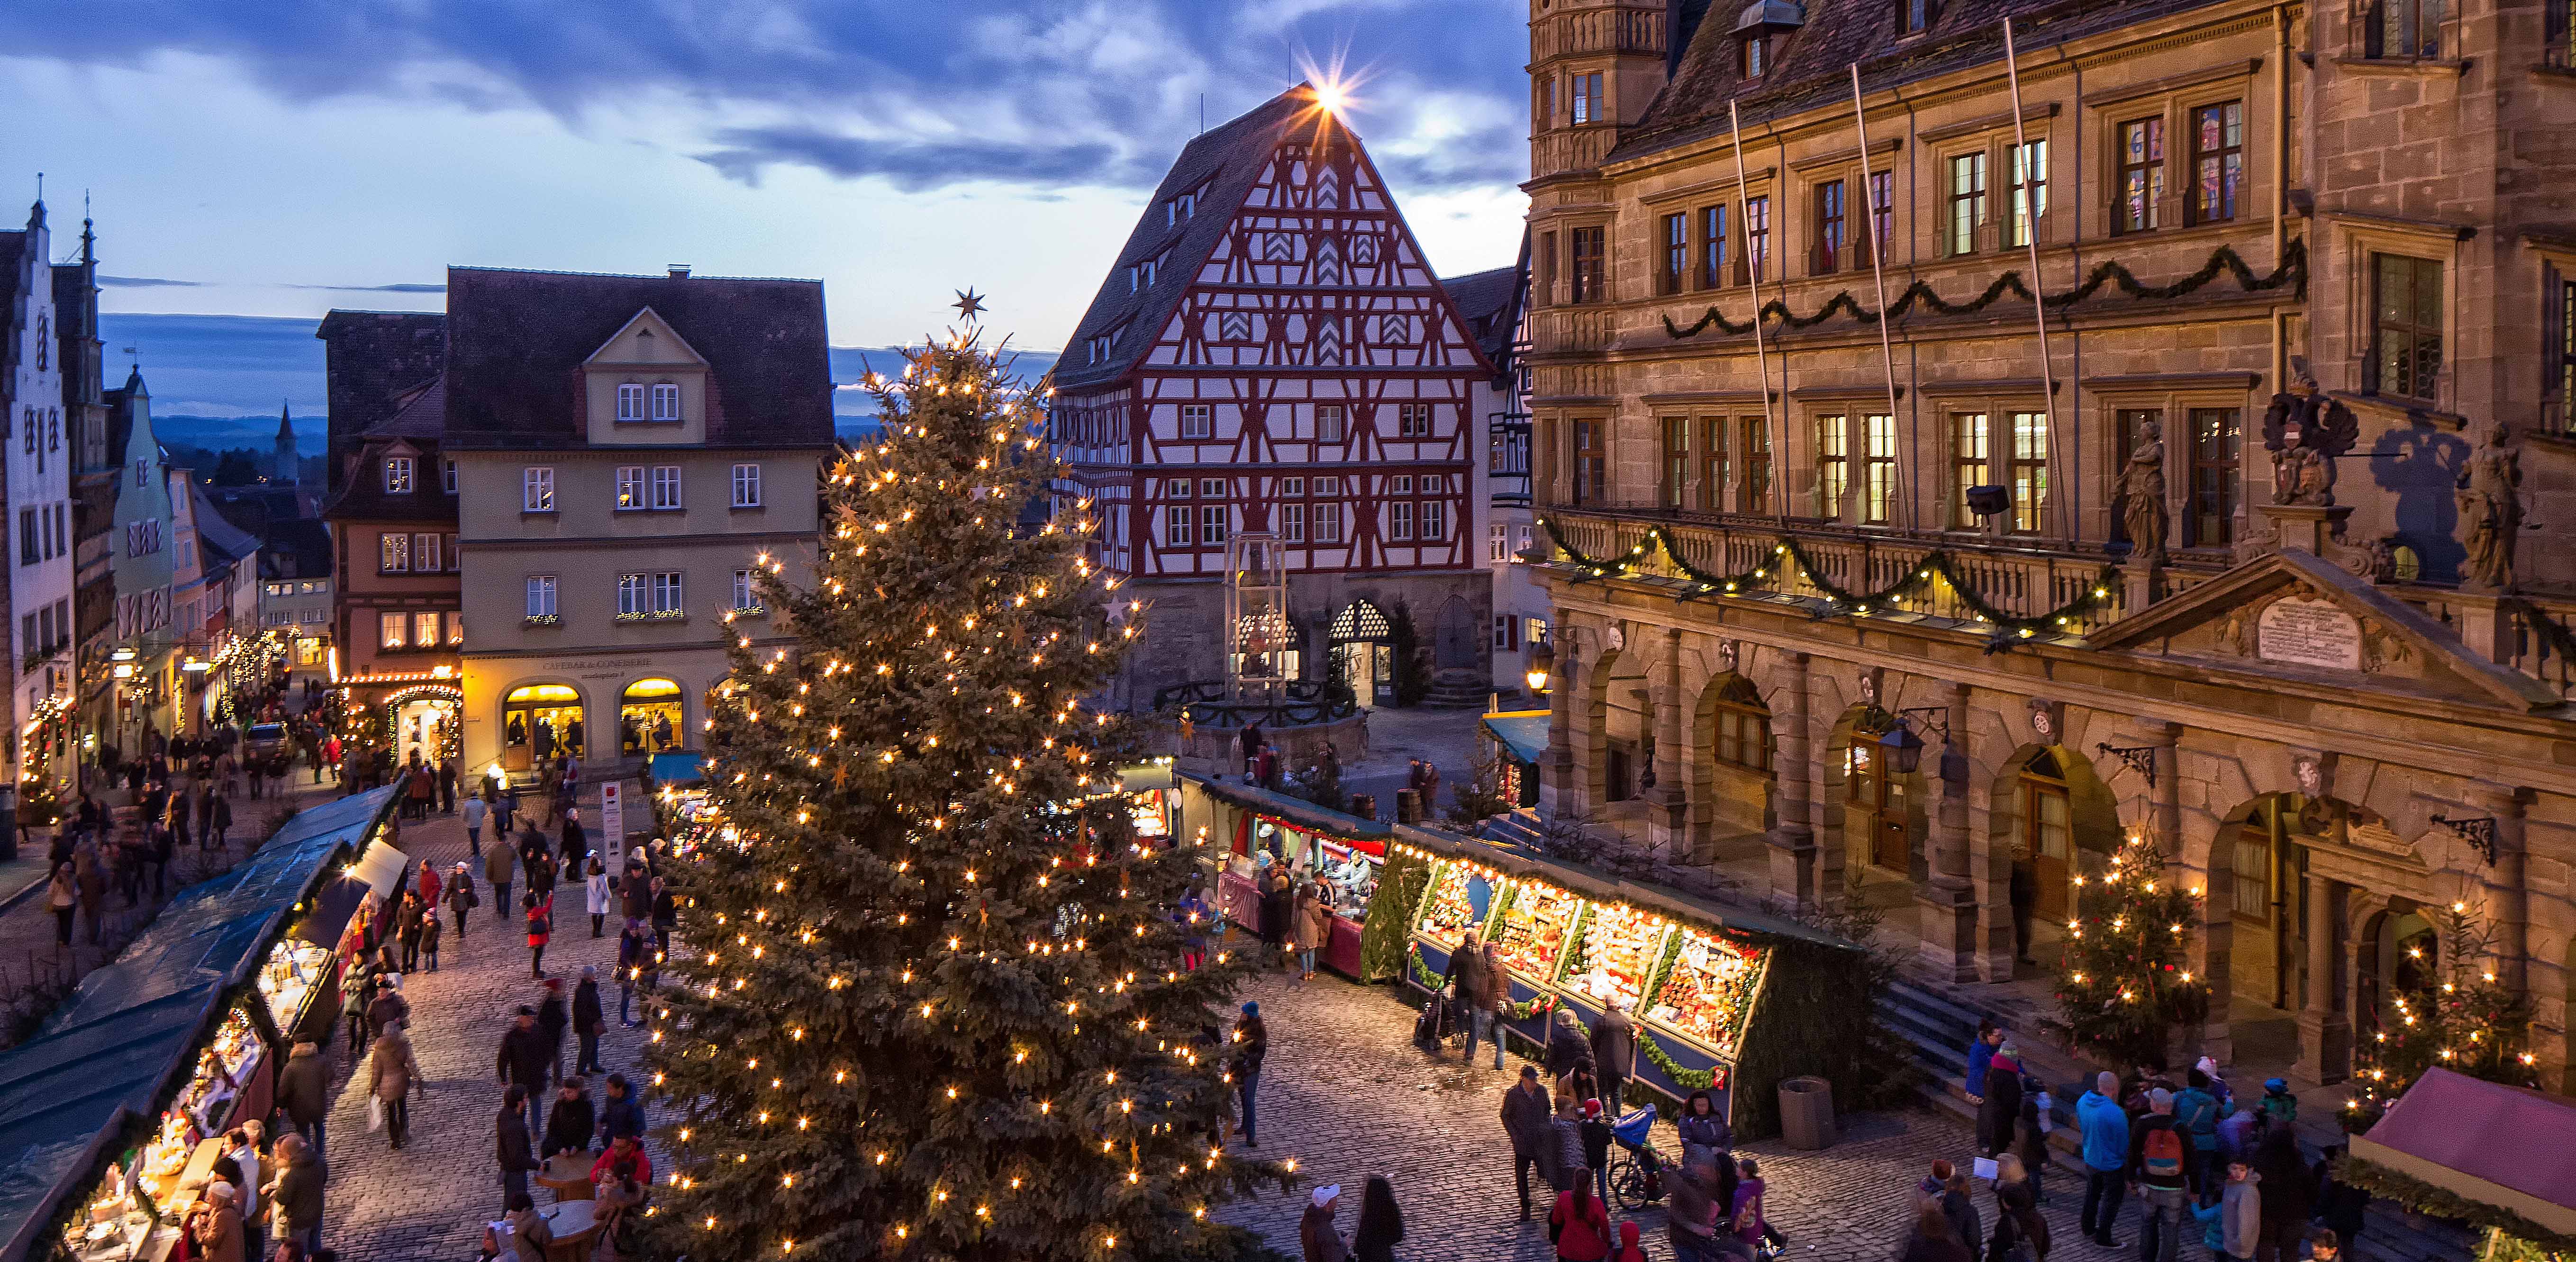 The Best Christmas Markets Between Nuremberg and Rothenburg